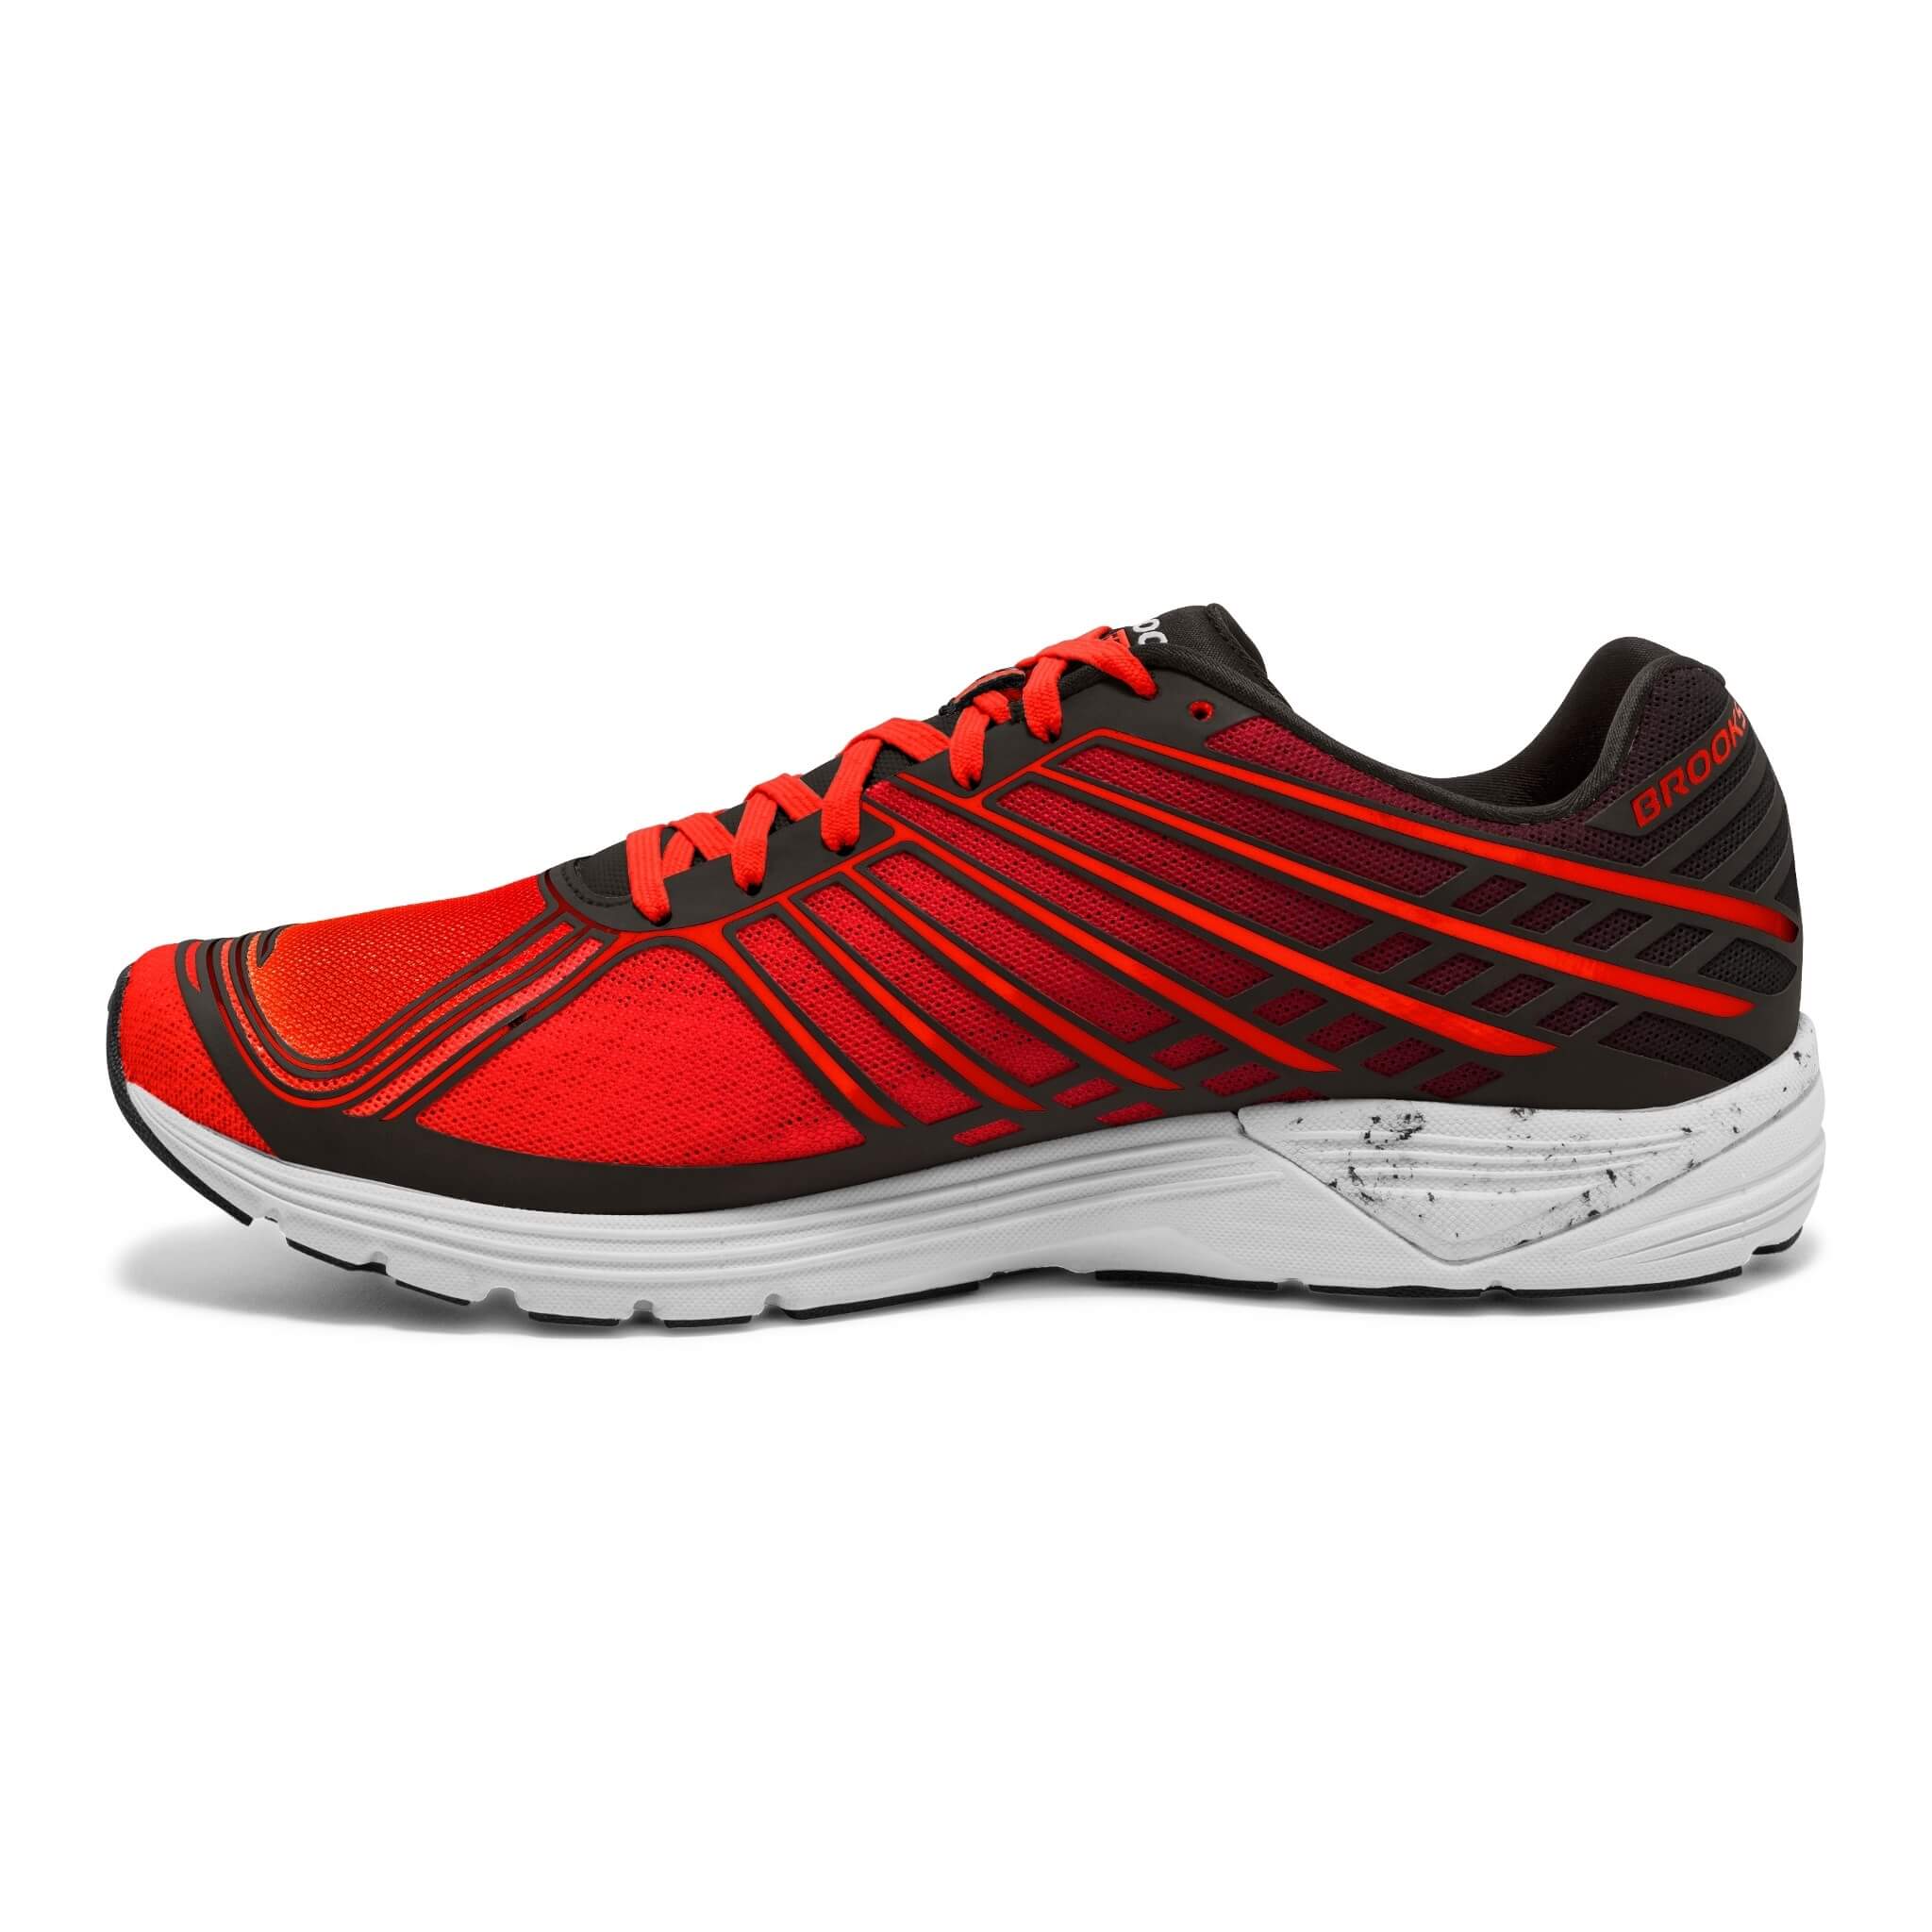 Brooks Asteria Mens Running Shoes Red Lightweight Speed Racing Trainers UK 7-12 